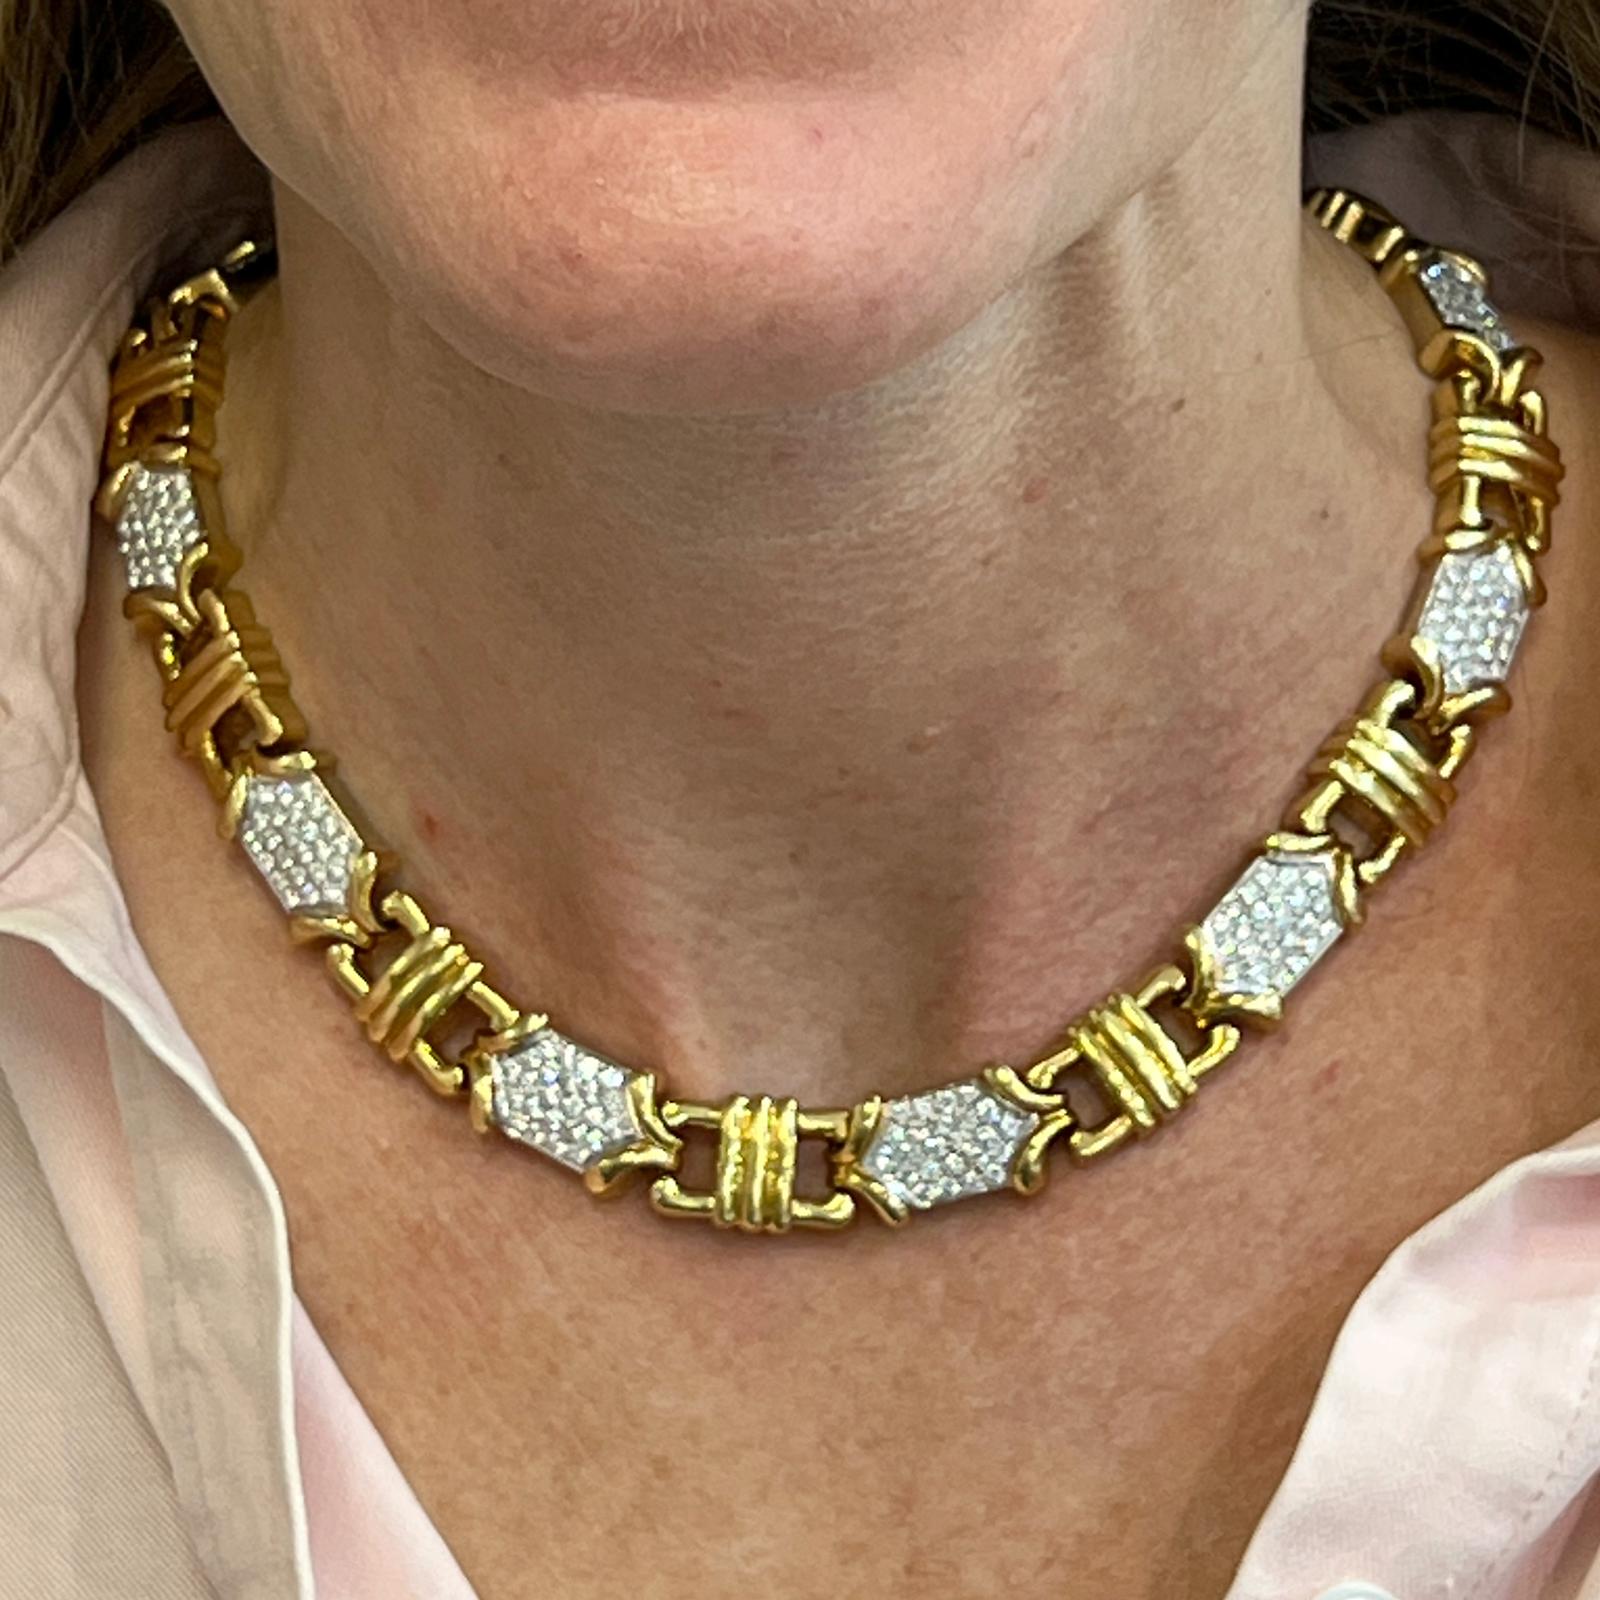 Stunning pave diamond link necklace fashioned in solid 18 karat yellow gold. The necklace features 264 round brilliant high quality diamonds weighing approximately 8.25 carat total weight. The diamonds are graded G-H color and VS clarity. The